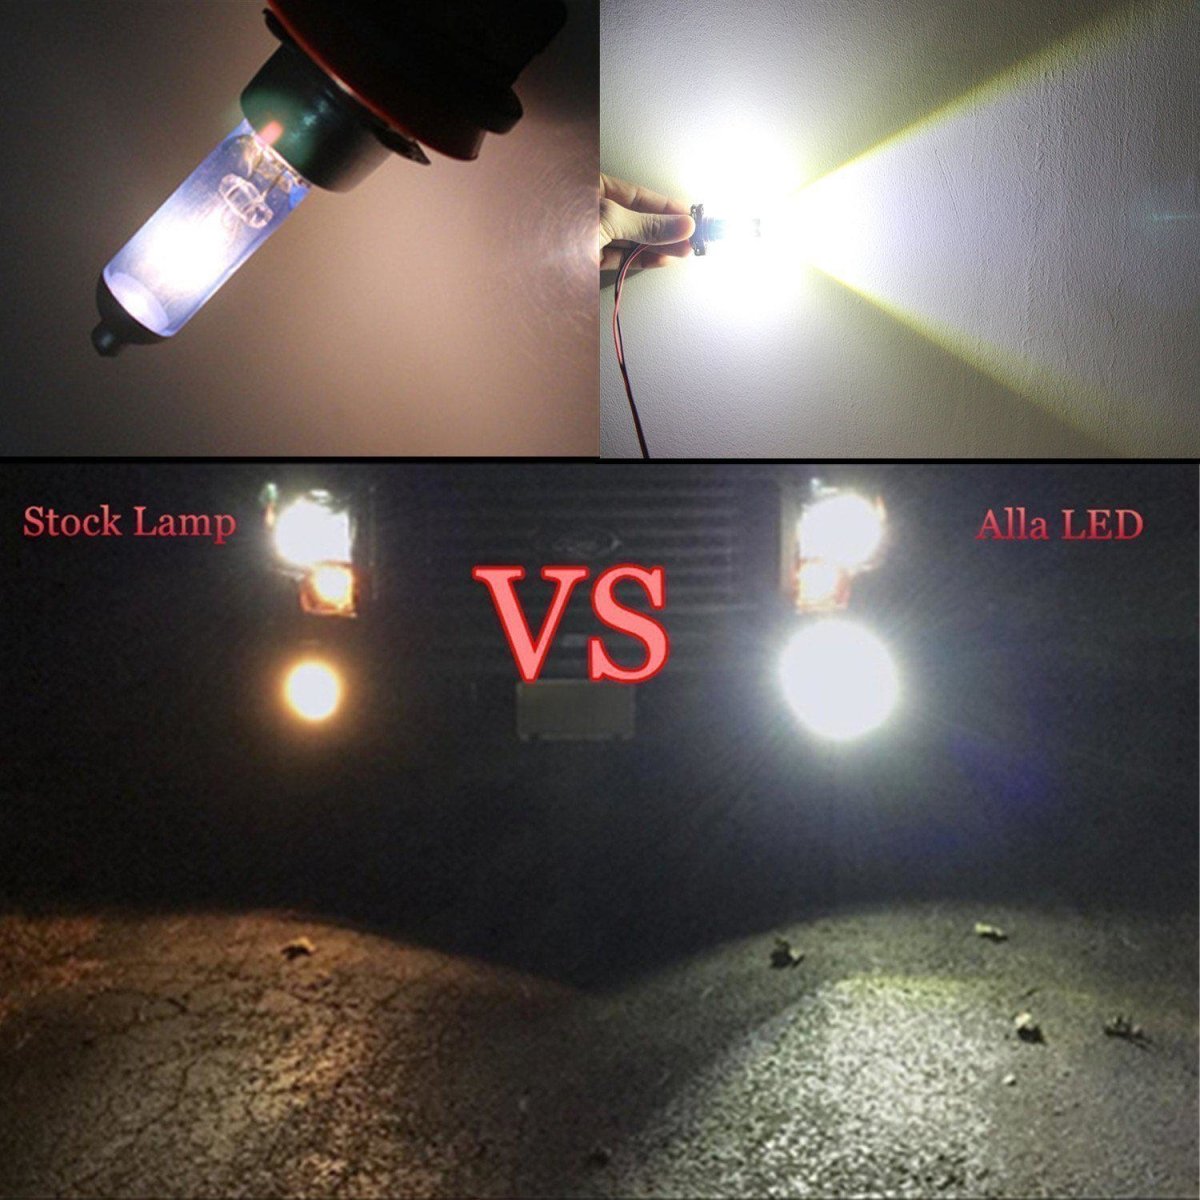 5201 5202 LED Bulbs 50W Cree Fog Lights DRL Replacement for Cars, Trucks -Alla Lighting